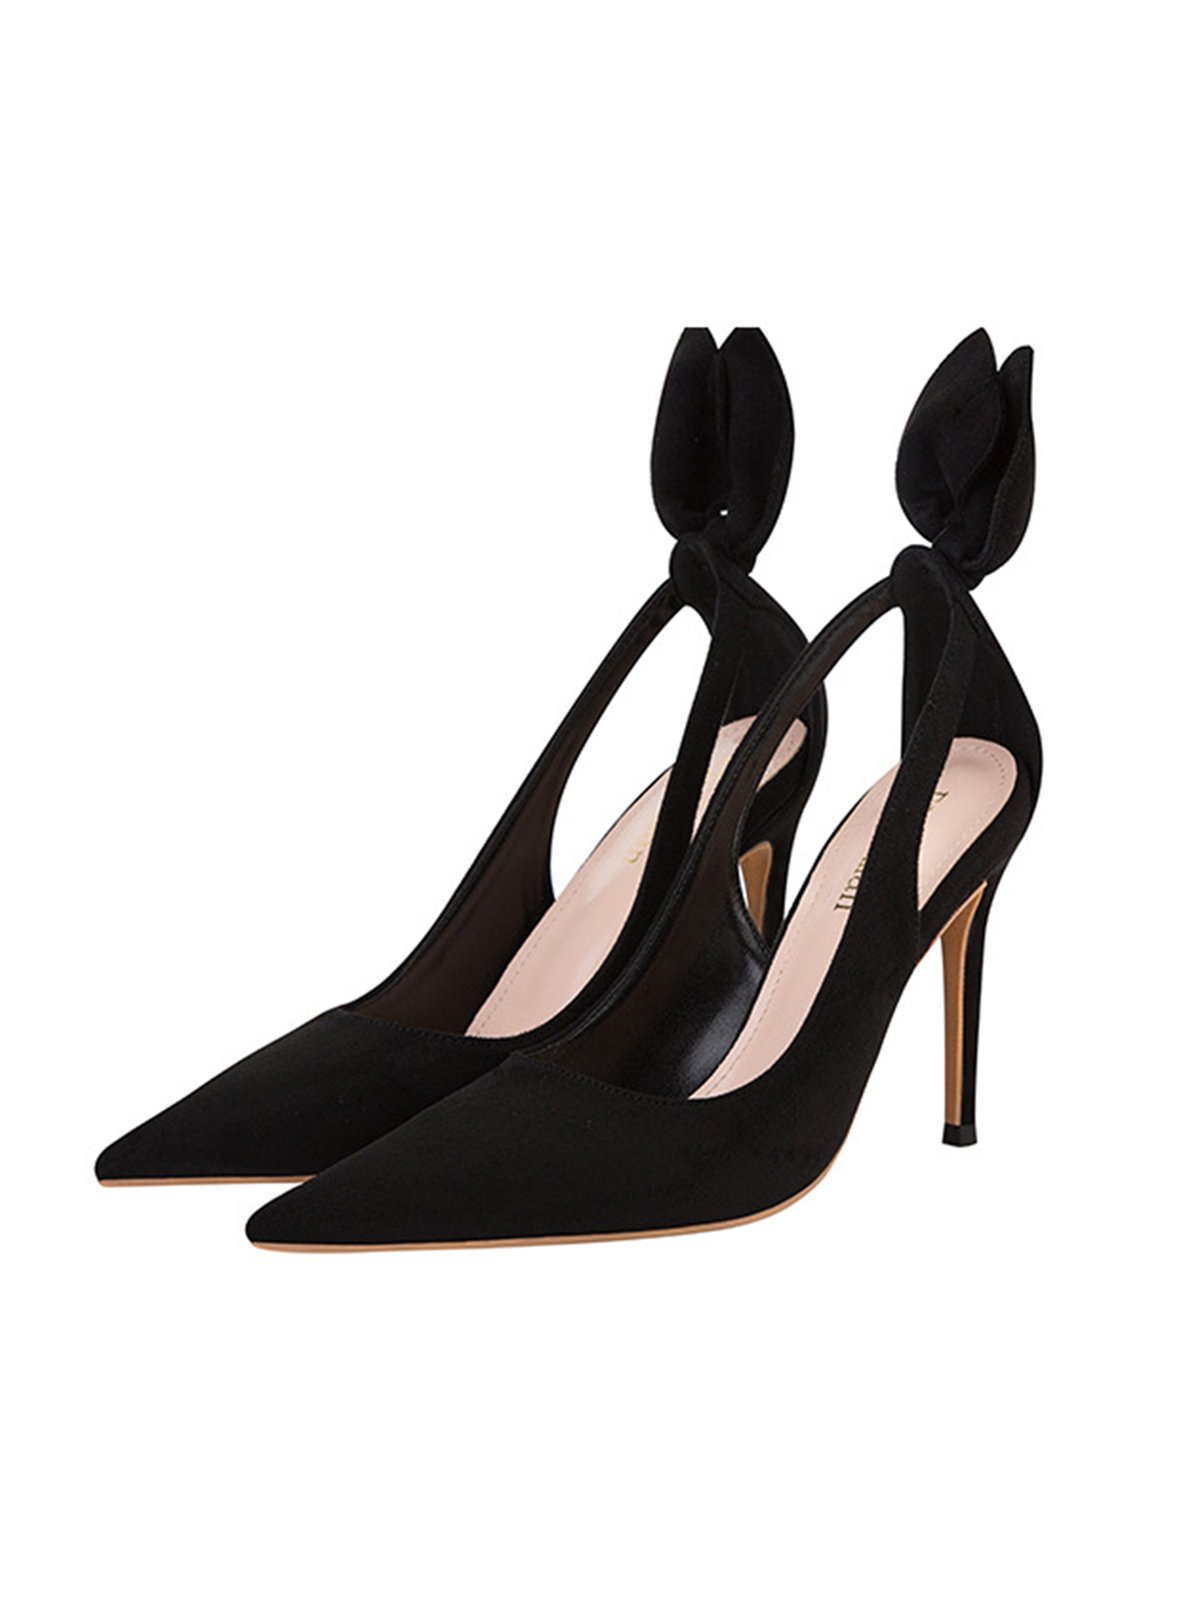 Fashion Bowknot Hollow Out Stiletto Heel Pumps